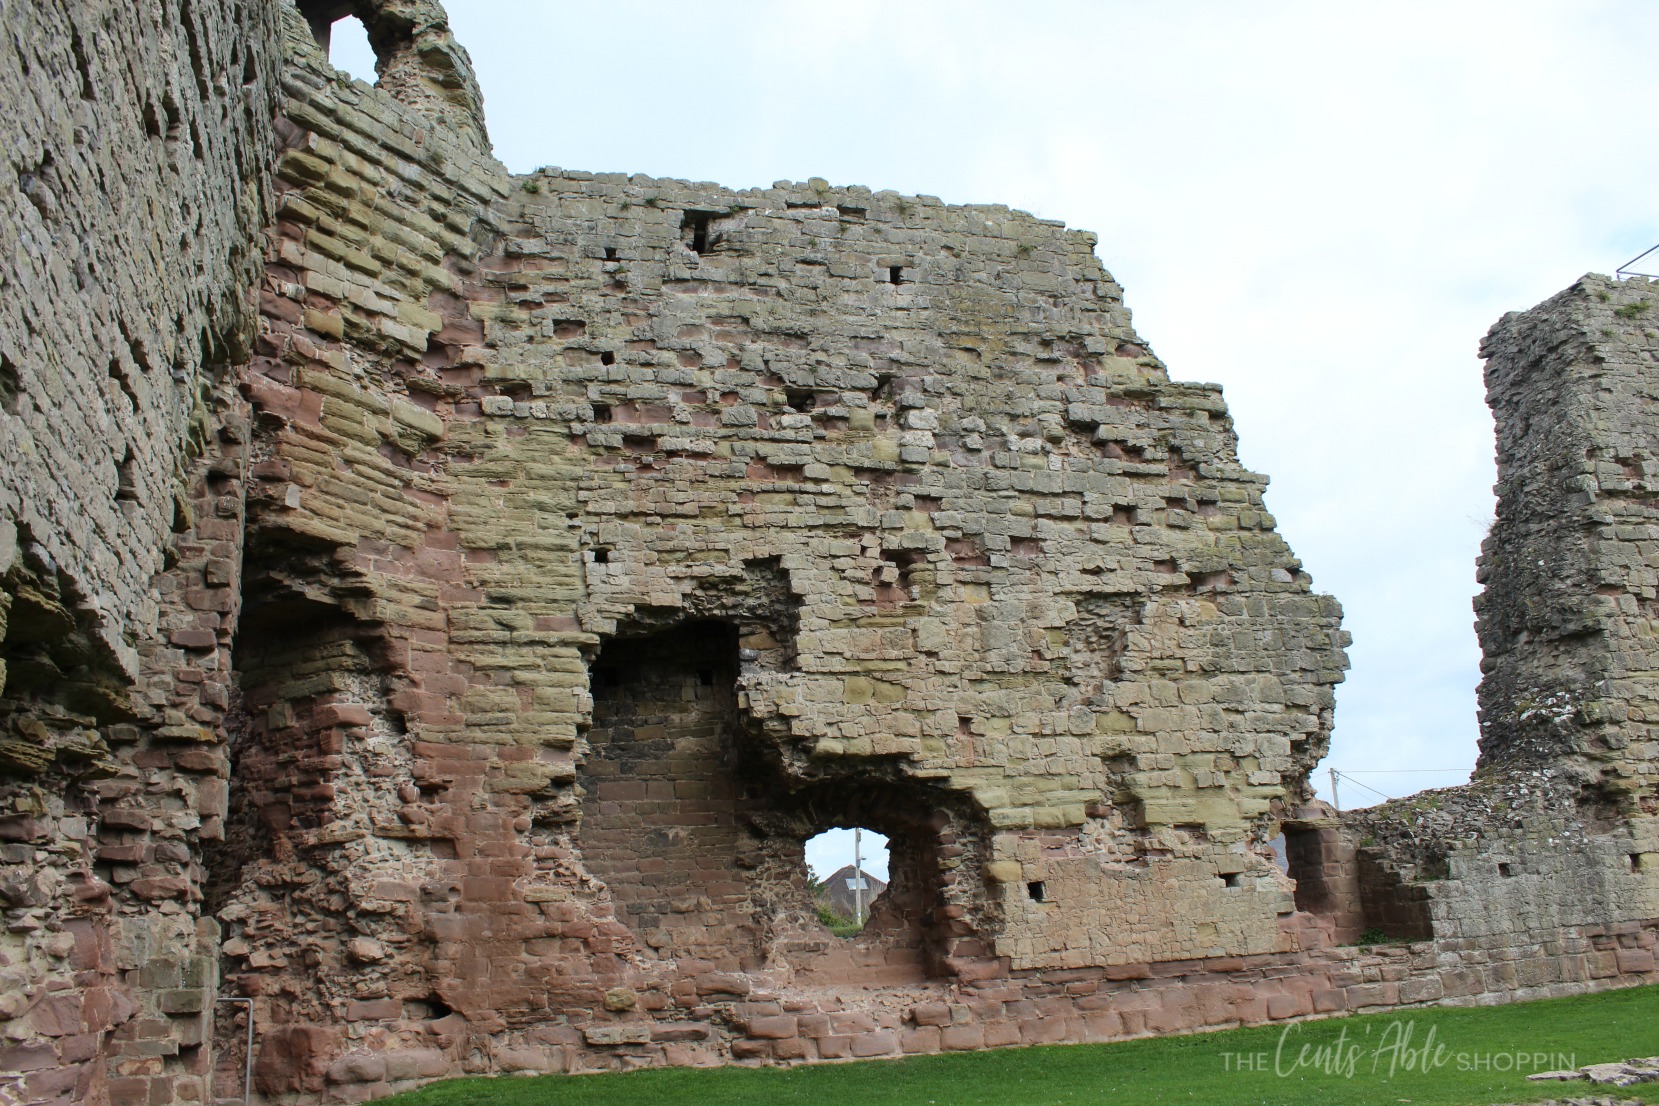 Courtyard  \\ Rhuddlan Castle is a castle located in Rhuddlan, Denbighshire, Wales. It was one of a series of castles erected by King Edward I in 1277.